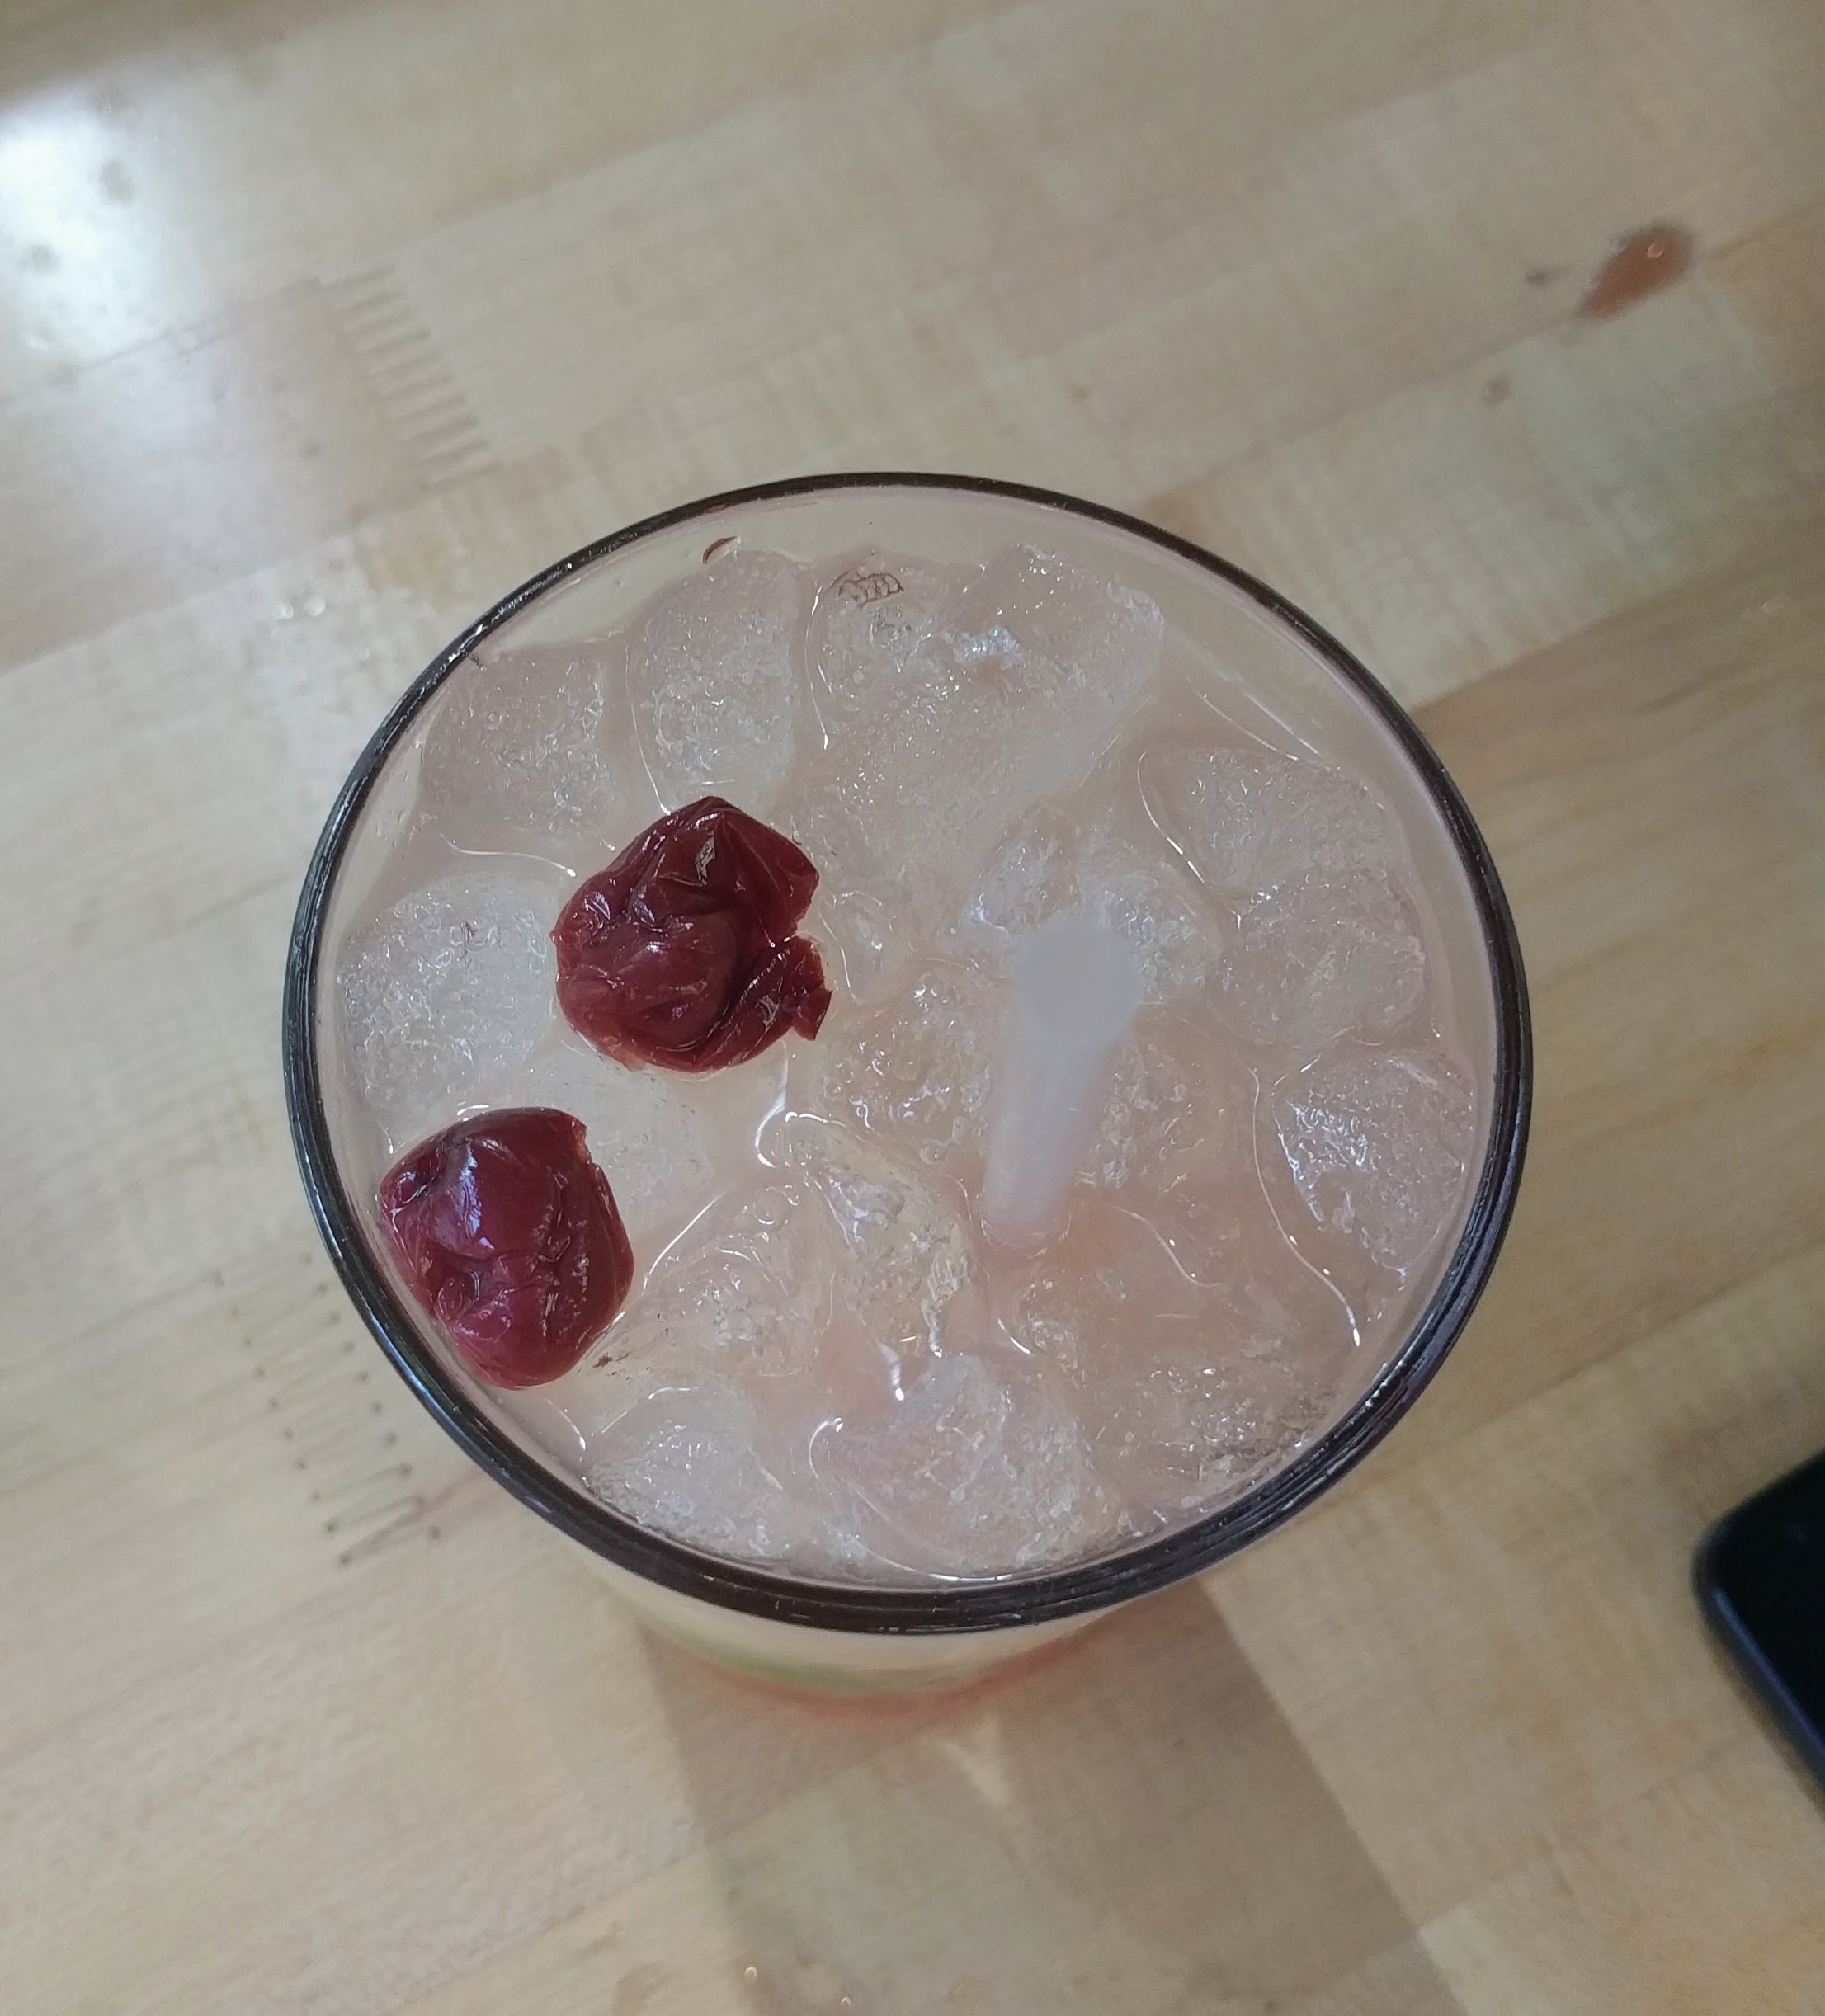 Top down view of a drink with two cherries floating on top